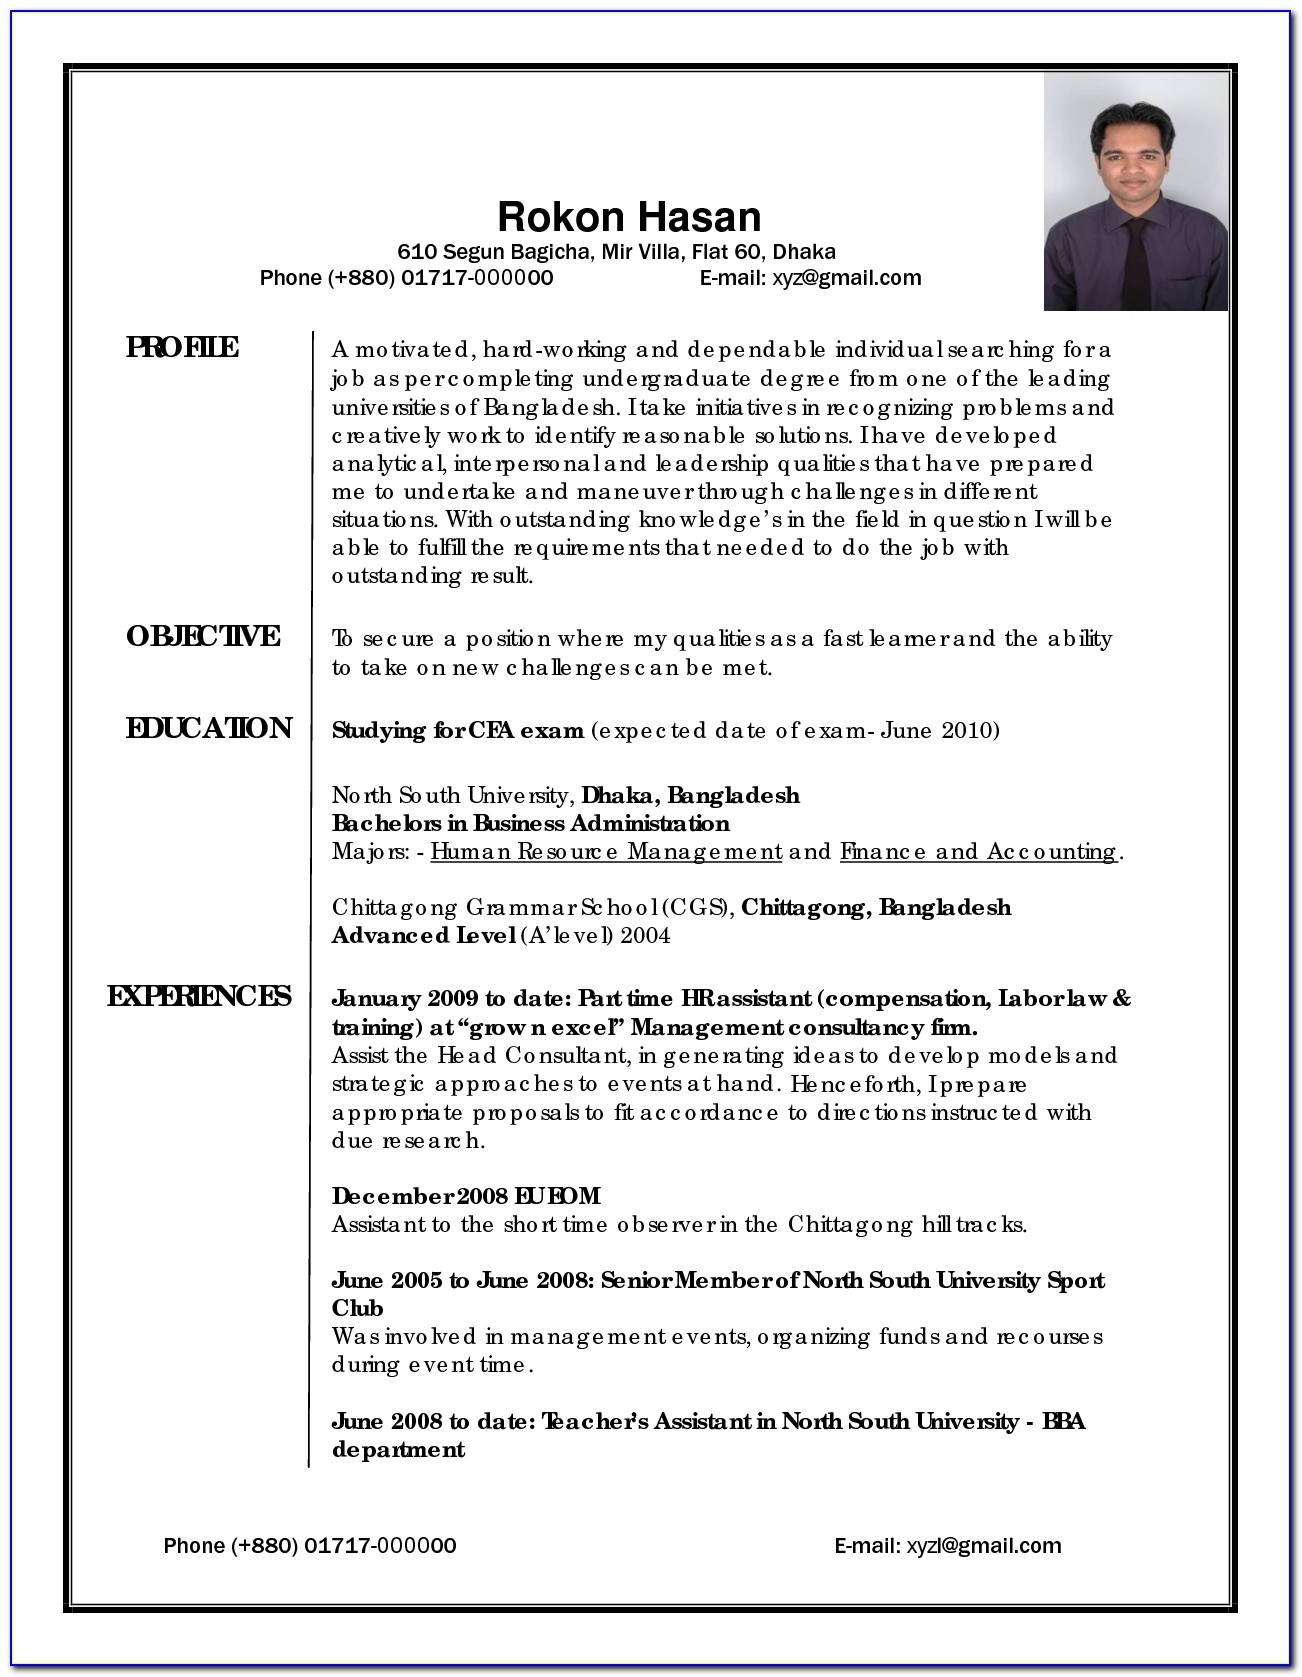 Download Professional Resume Writing Service Easy Sample Essay Inside 87 Amazing Sample Professional Resume